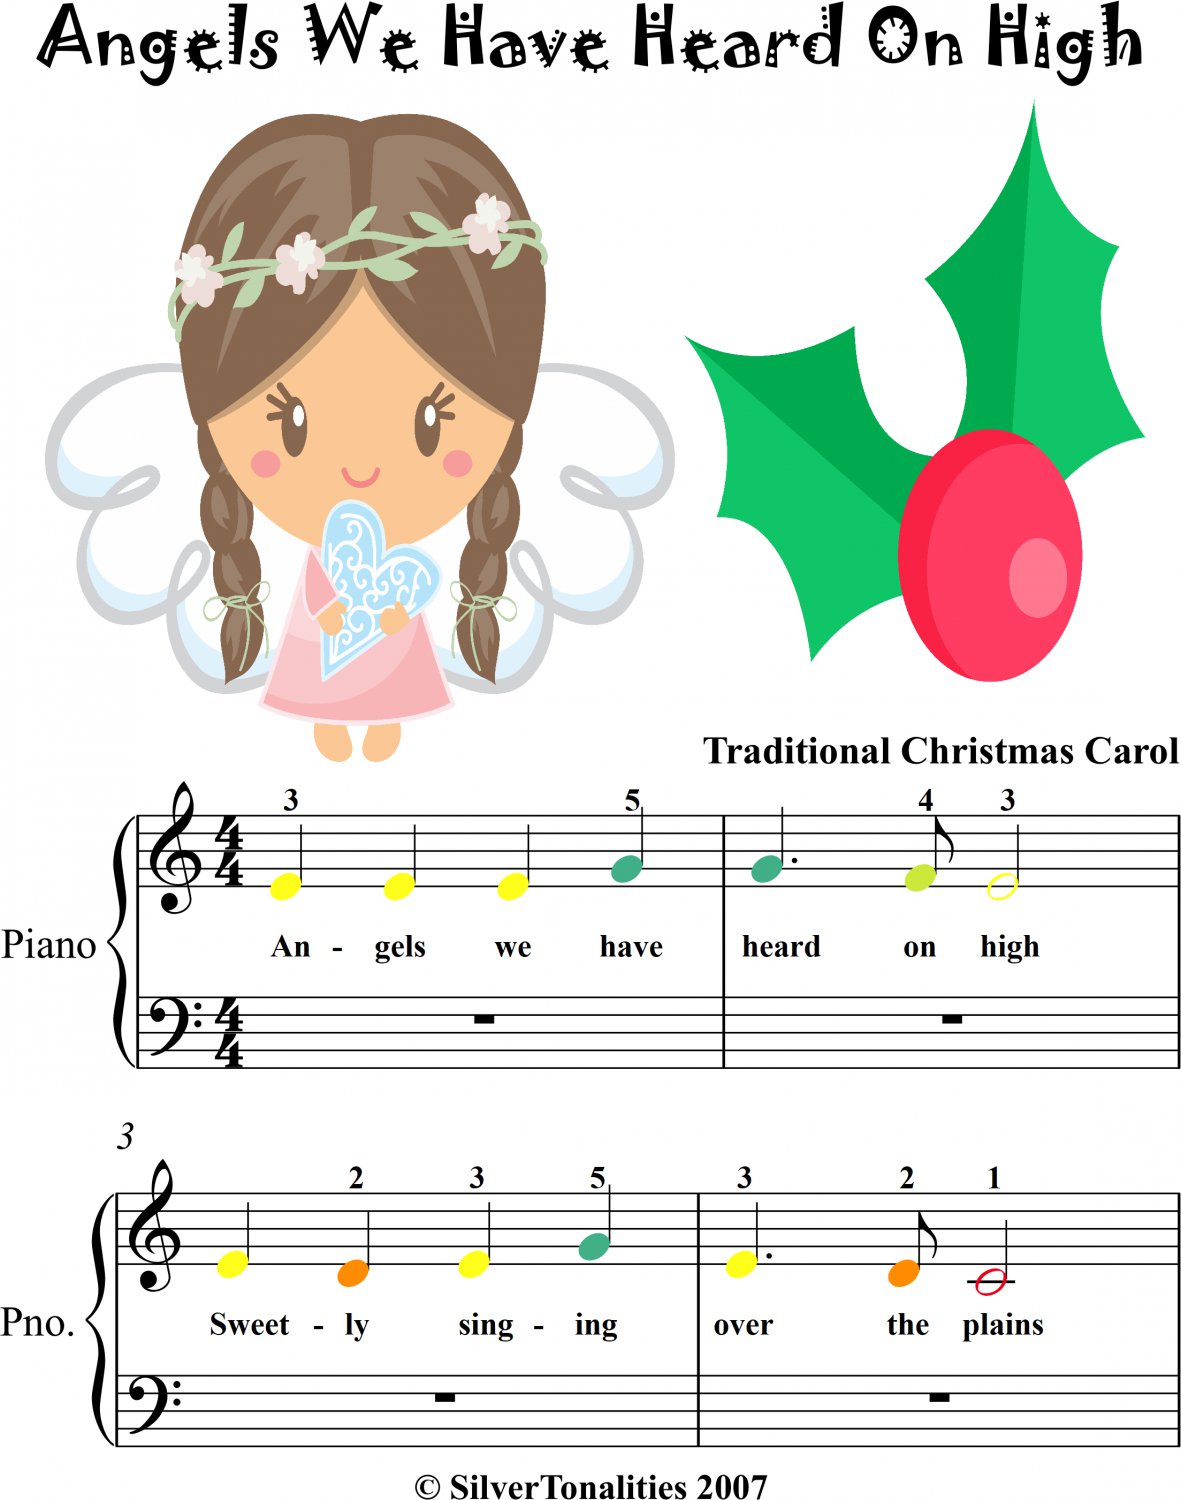 Angels We Have Heard On High Beginner Piano Sheet Music with Colored Notes